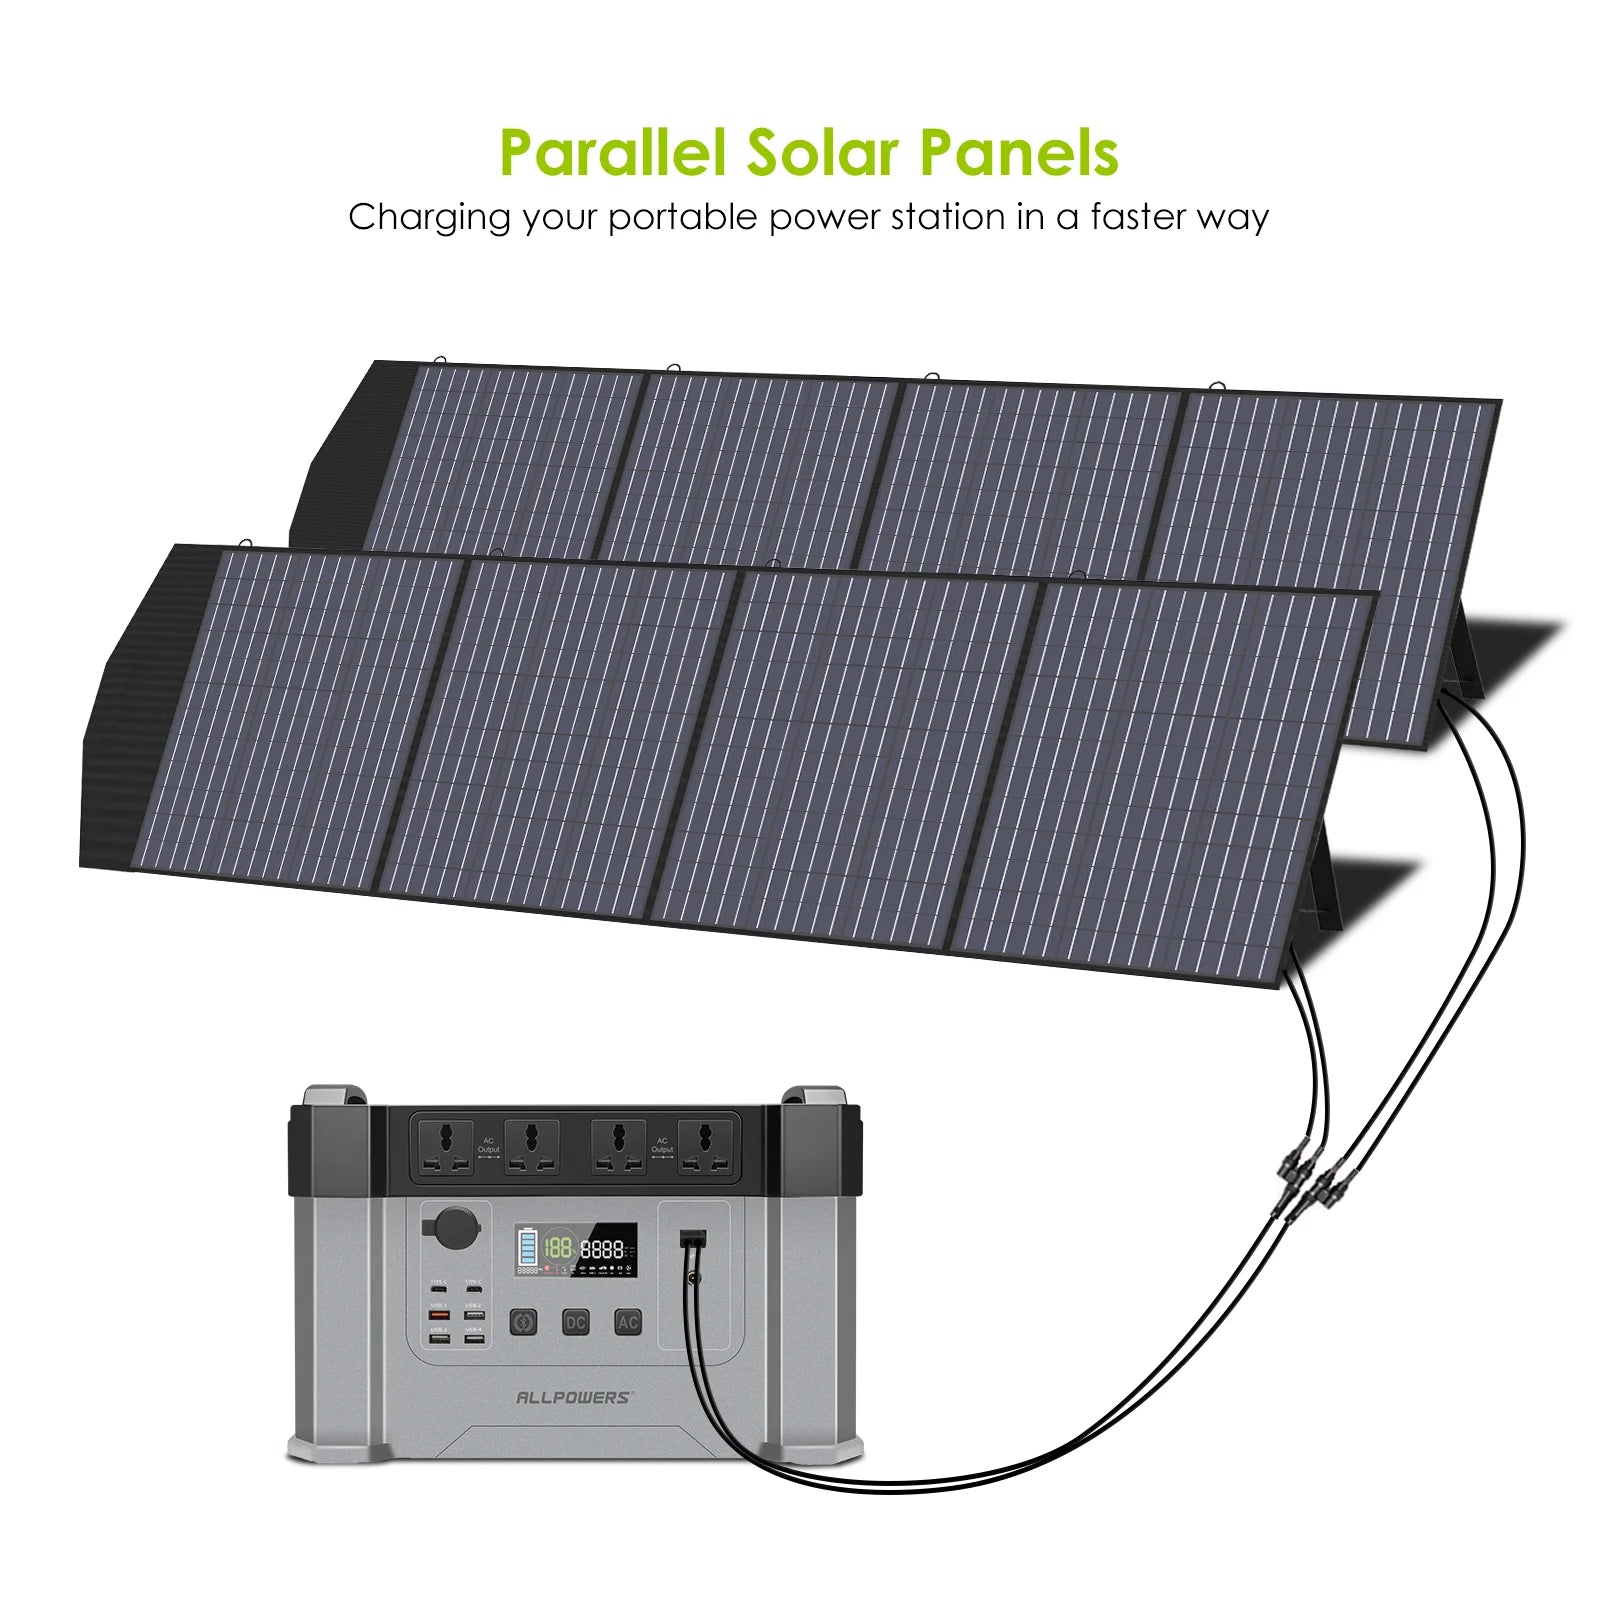 Charge your portable power station quickly with parallel solar panels, achieving a fast and efficient recharge.